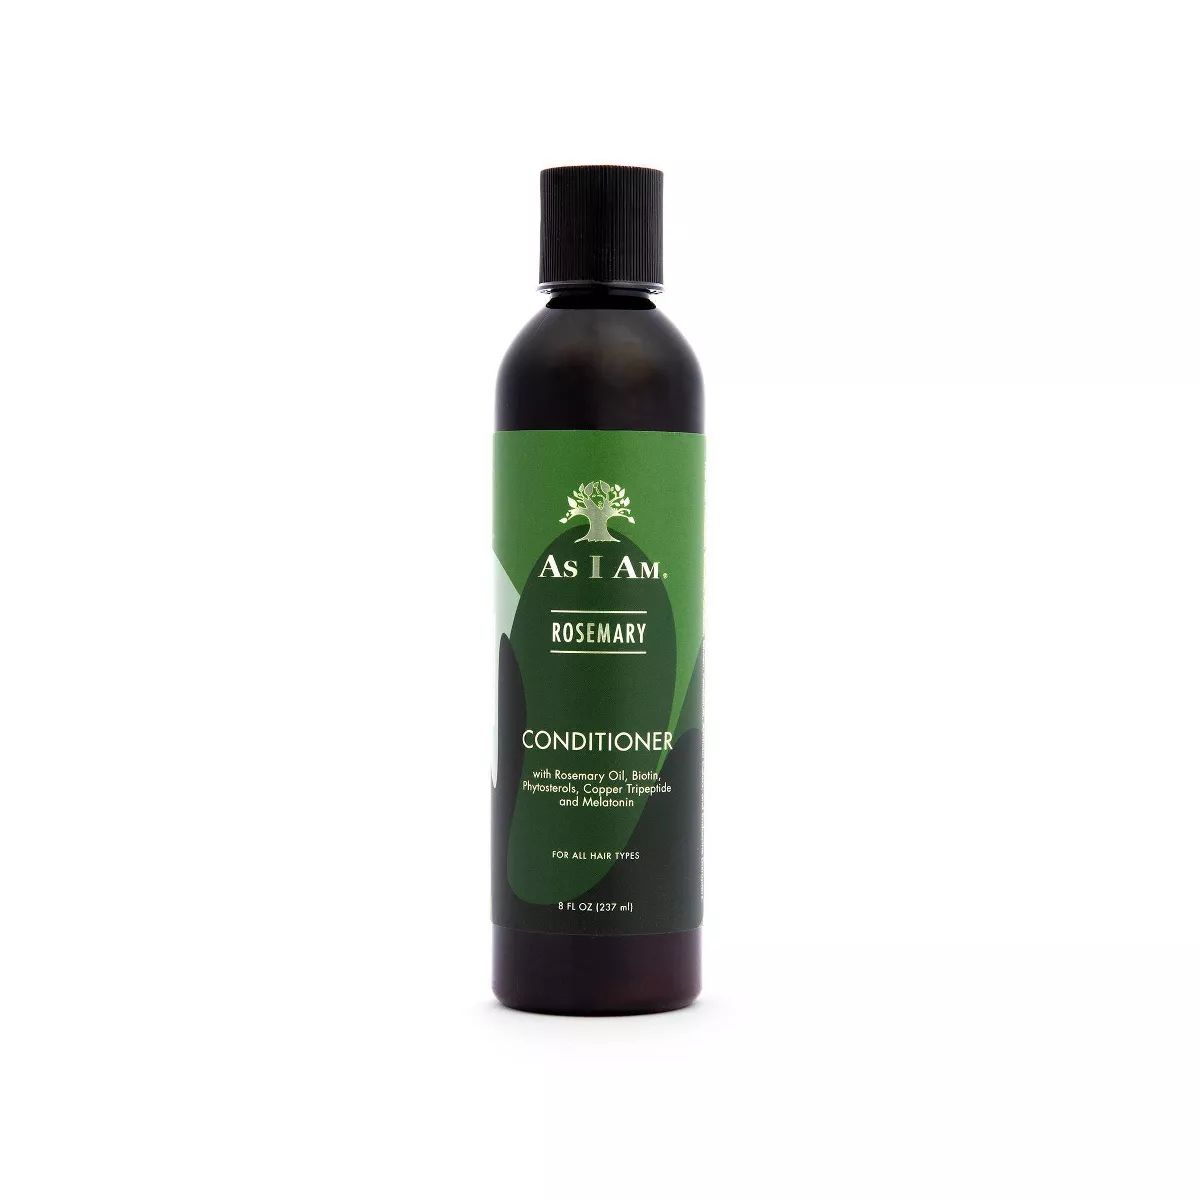 As I Am Rosemary Conditioner - 8 fl oz | Target